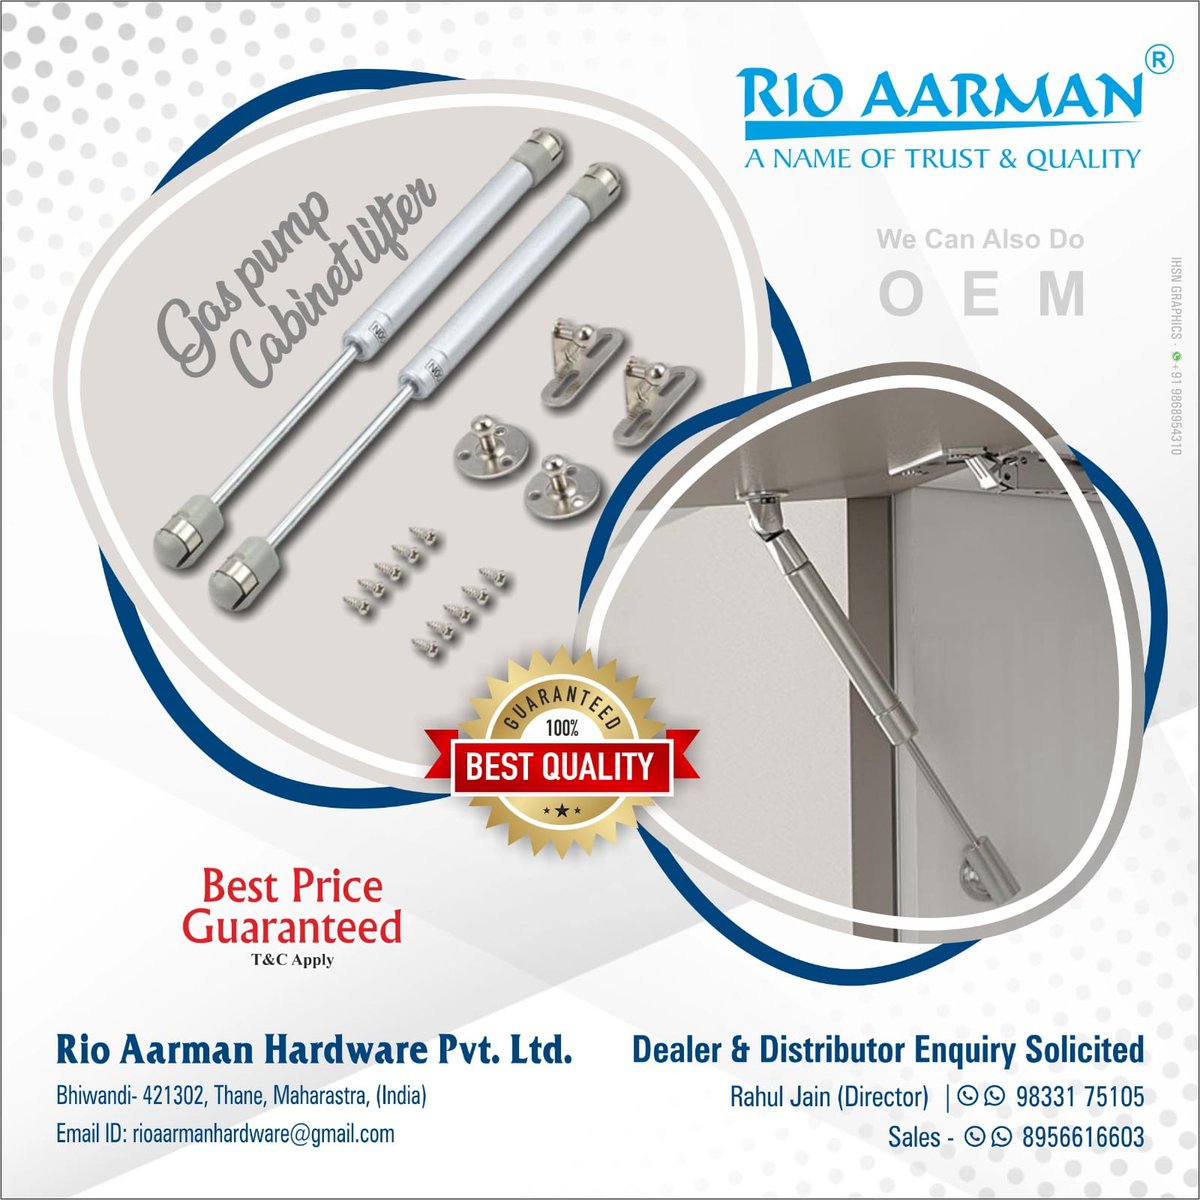 “𝐑𝐈𝐎 𝐀𝐀𝐑𝐌𝐀𝐍 𝐇𝐀𝐑𝐃𝐖𝐀𝐑𝐄' Brings the Powerful Cabinet Lifter which will add extra strength to your Cabinets.

#rioaarmanhardware #Aaro #hardwarestore #AutoHinges #SlidingTrackRollers #Tendombox #hardware #OEM